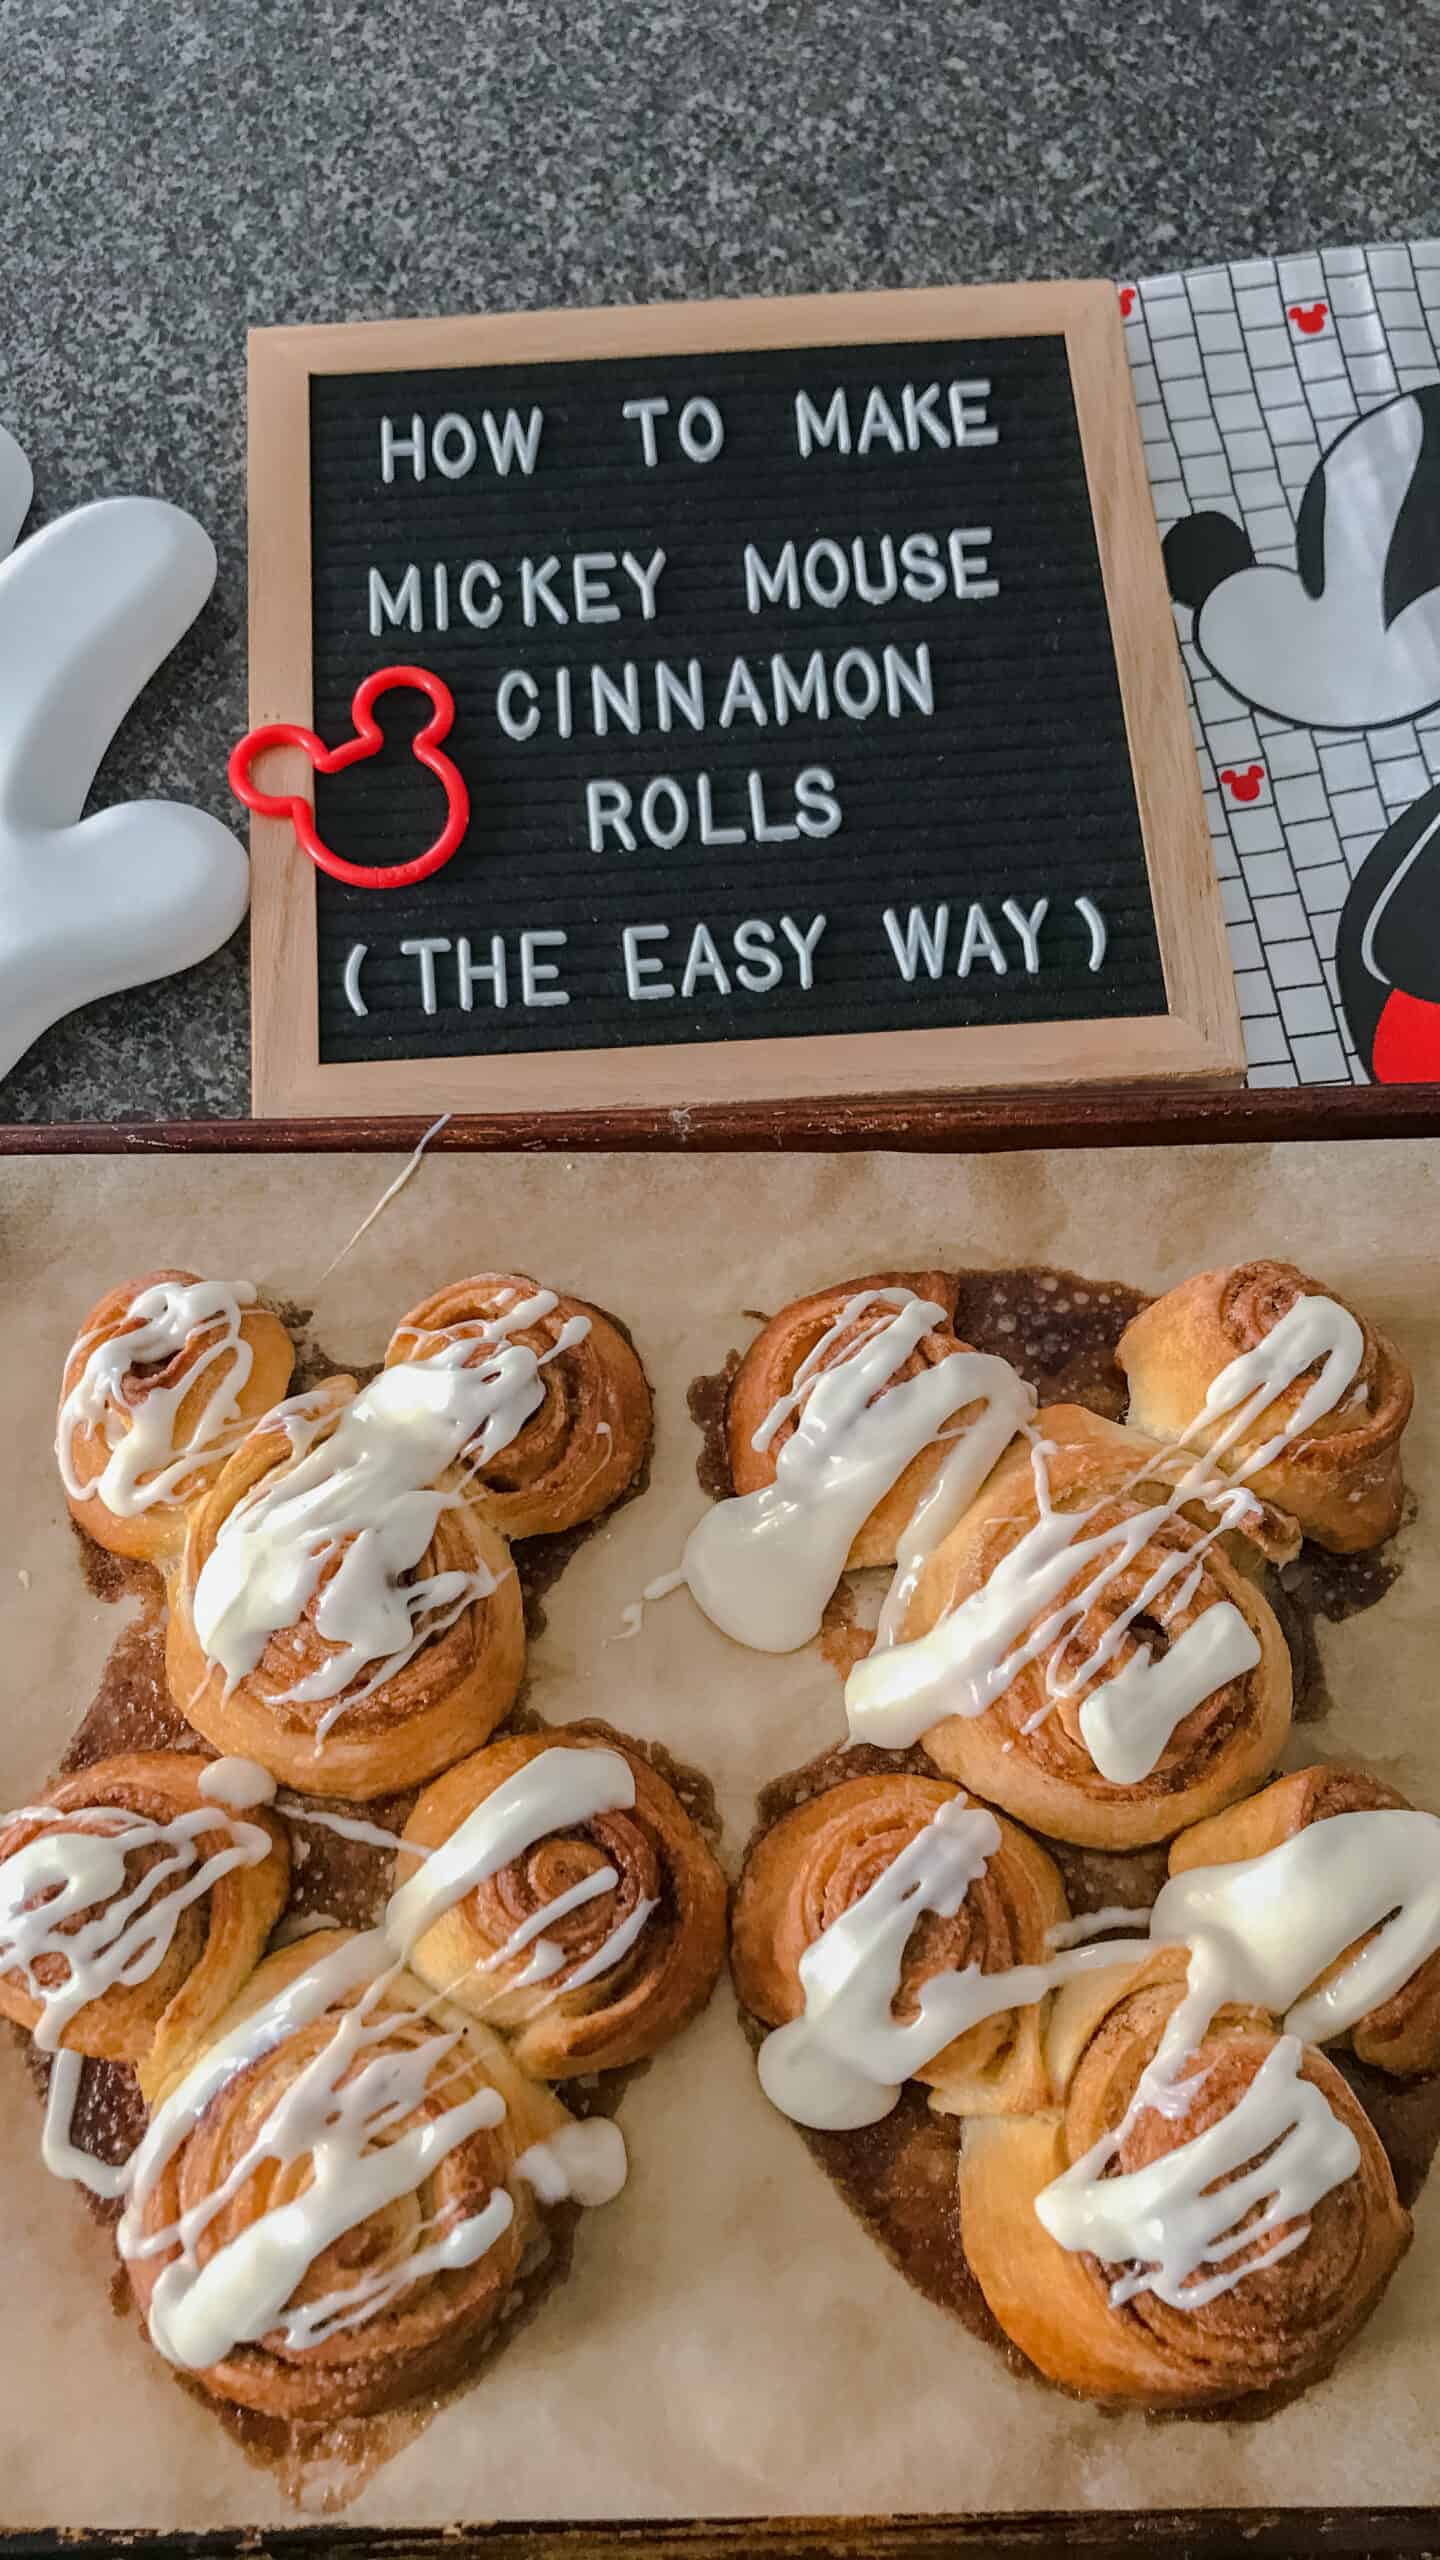 How to Make Mickey Mouse Cinnamon Rolls (the easy way)